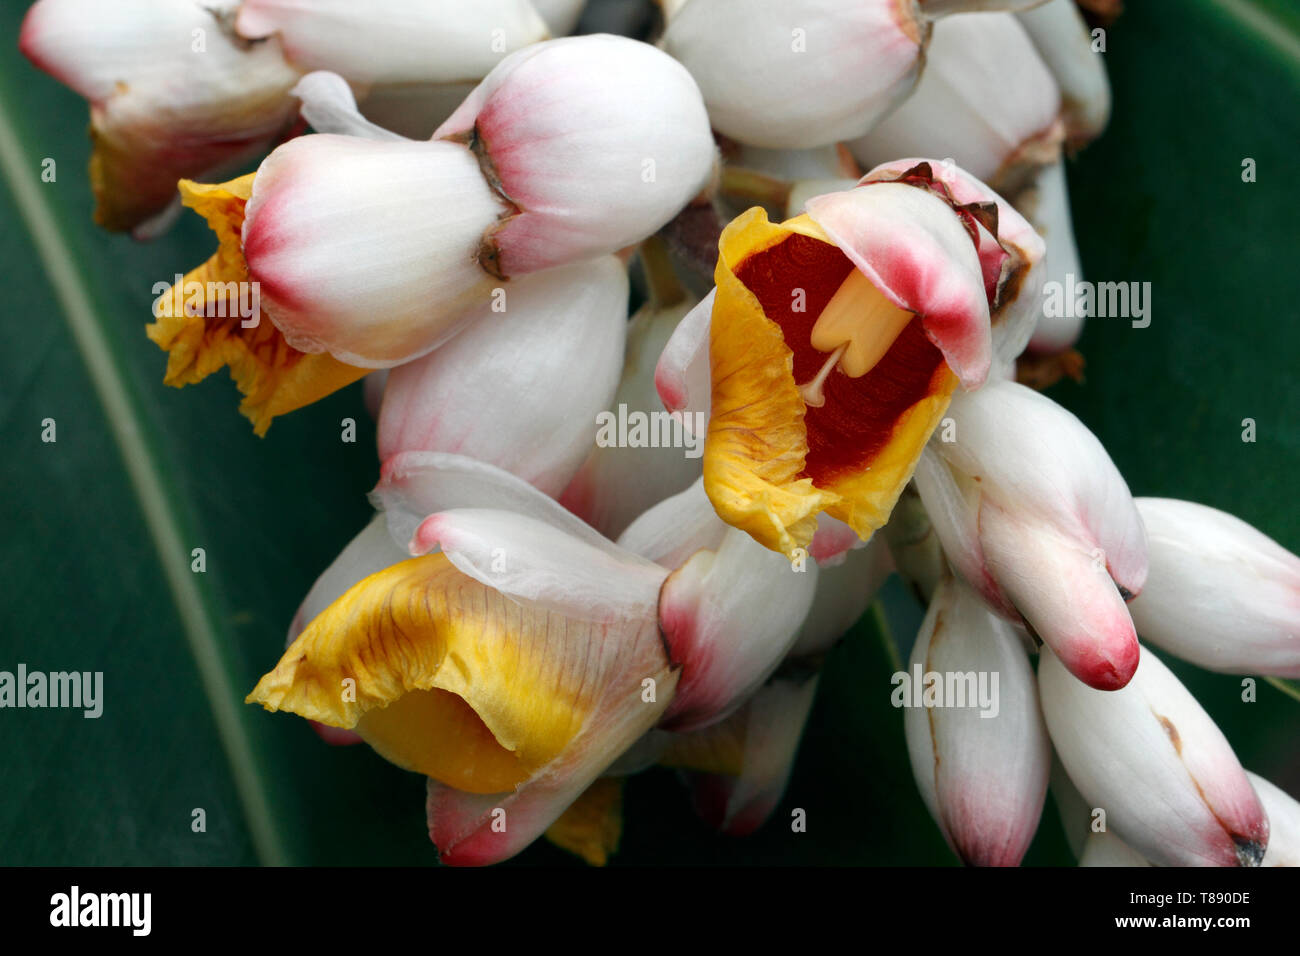 exotic red yellow and white tropical flowers. Alpinia speciosa, shell ginger, Alpinia zerumbet Stock Photo